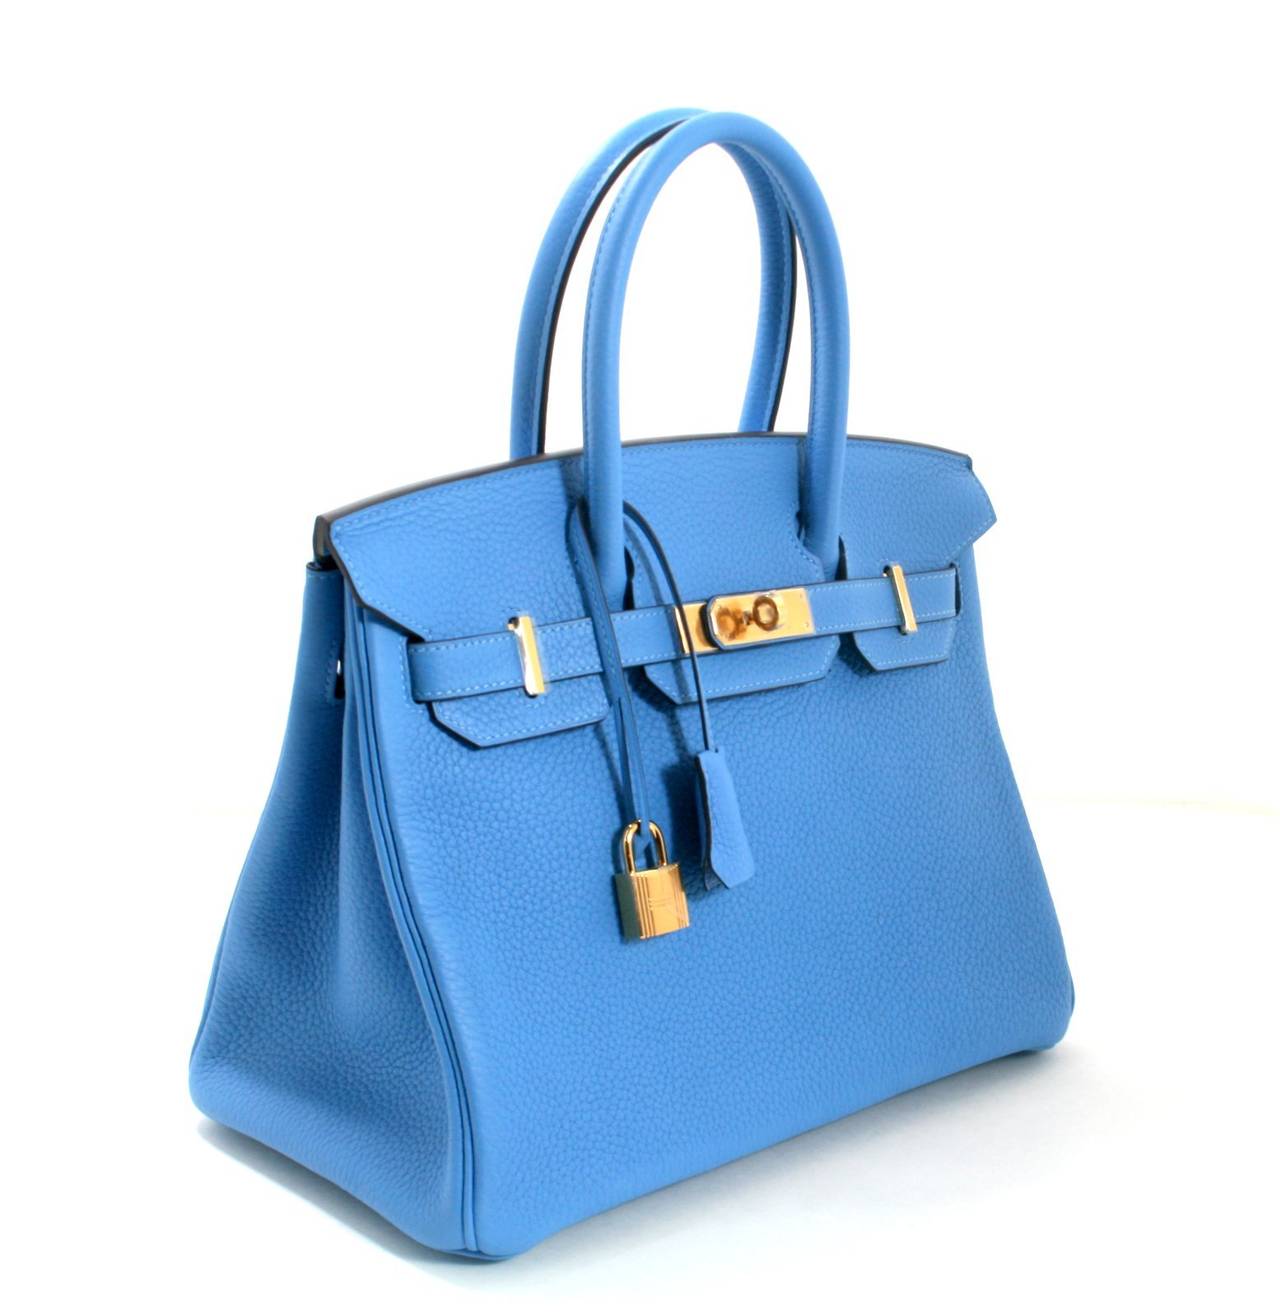 Hermès 30 cm Bleu Paradis Clemence Birkin Bag with GHW In New Condition In New York City & Hamptons, NY